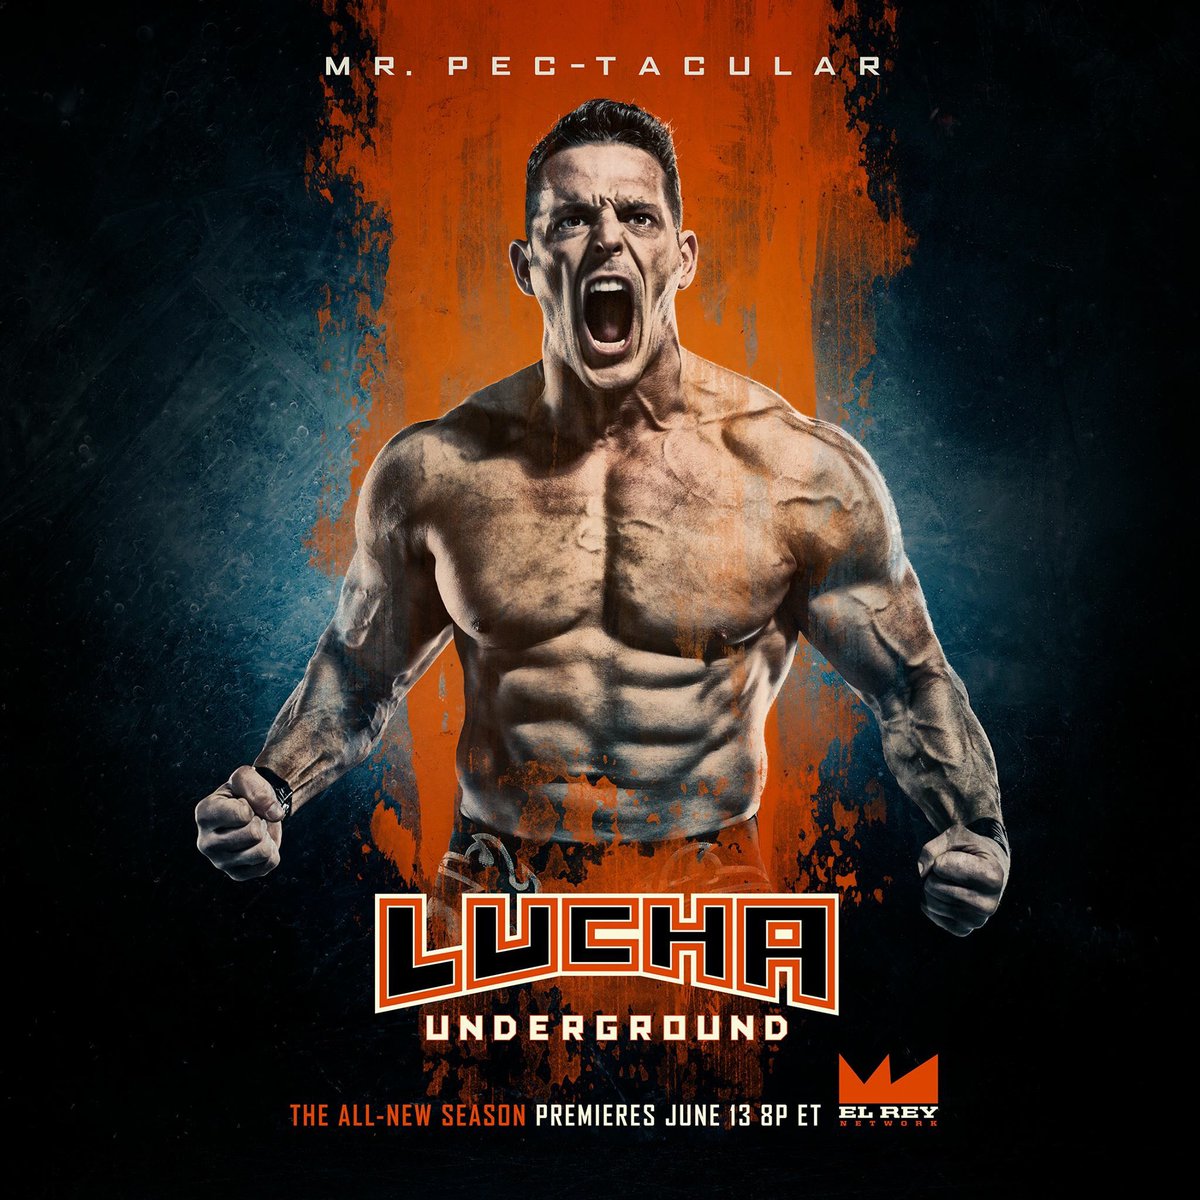 SURPRISE BELIEVERS... THE RUMORS ARE TRUE!! HONORED to officially announce that you can catch me on THE HUGE 4TH SEASON PREMIERE of LUCHA UNDERGROUND!! THIS WEDNESDAY, 6/13 at 8pmET ONLY on @LuchaElRey on EL REY NETWORK!! STOKED! U could be looking at the next LU CHAMP! #BB20